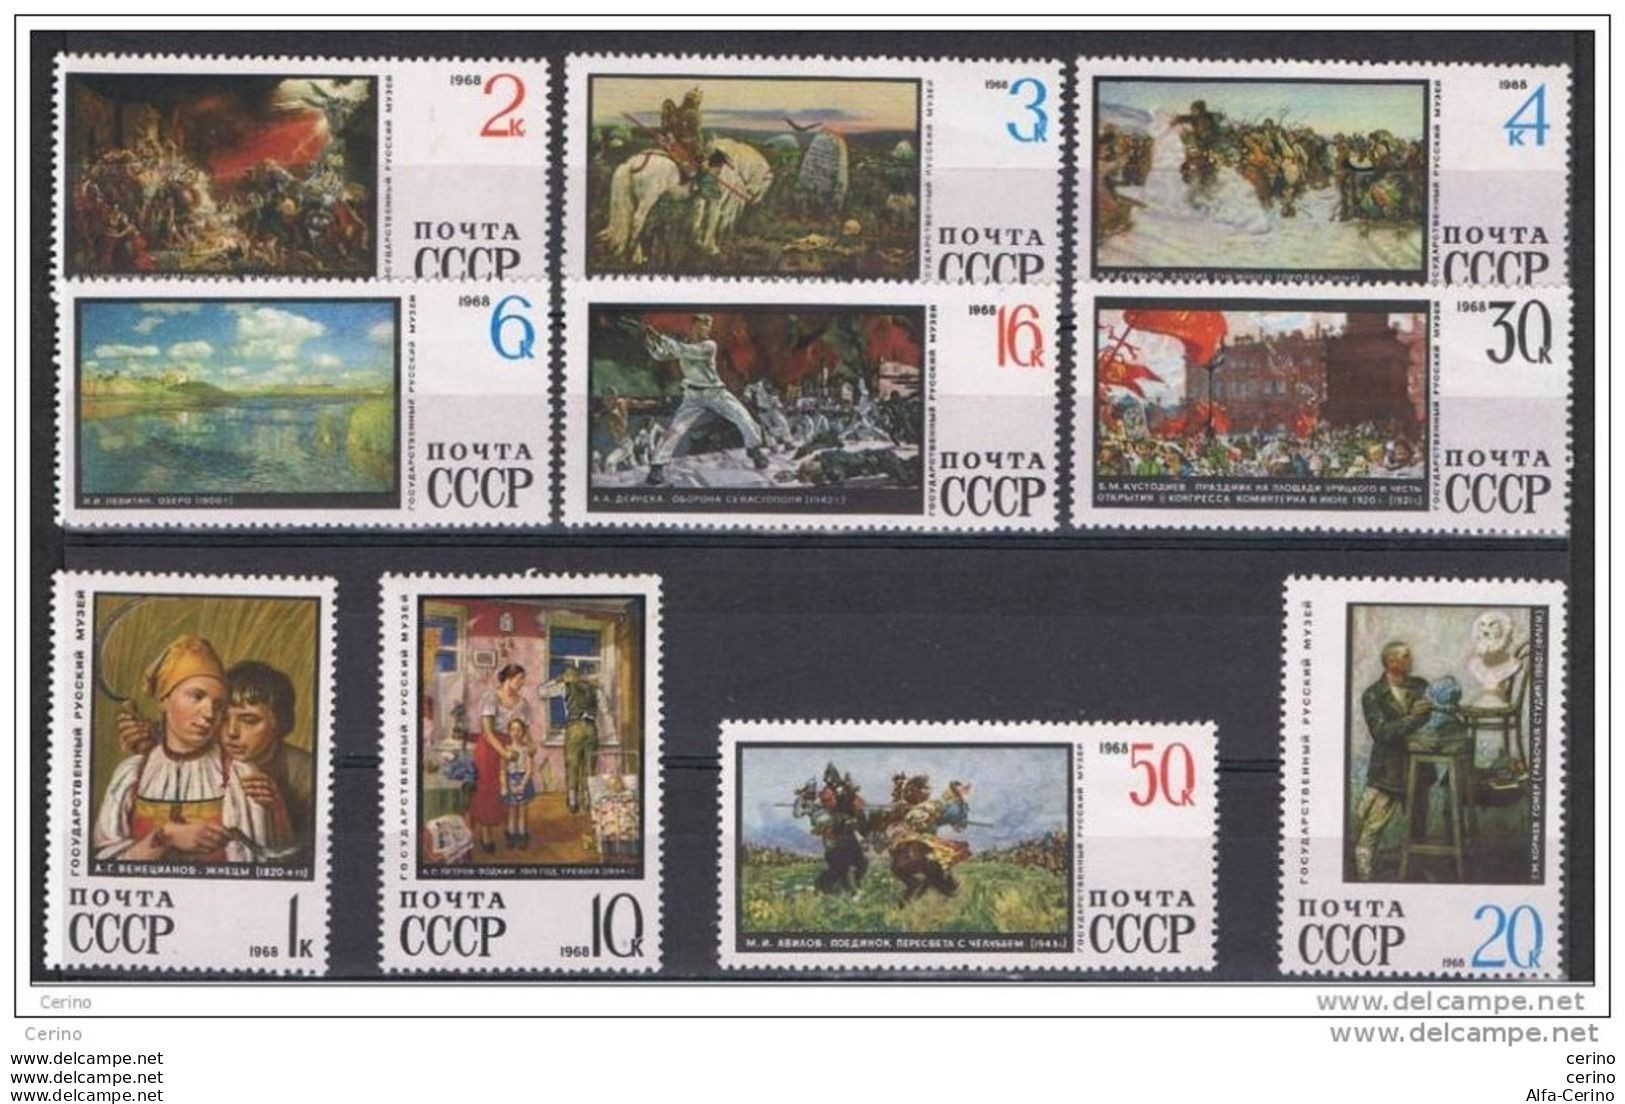 RUSSIA:  1968  MUSEO  DI  LENINGRADO  -  S. CPL. 10  VAL. N. -  YV/TELL. 3443/52 - Unused Stamps